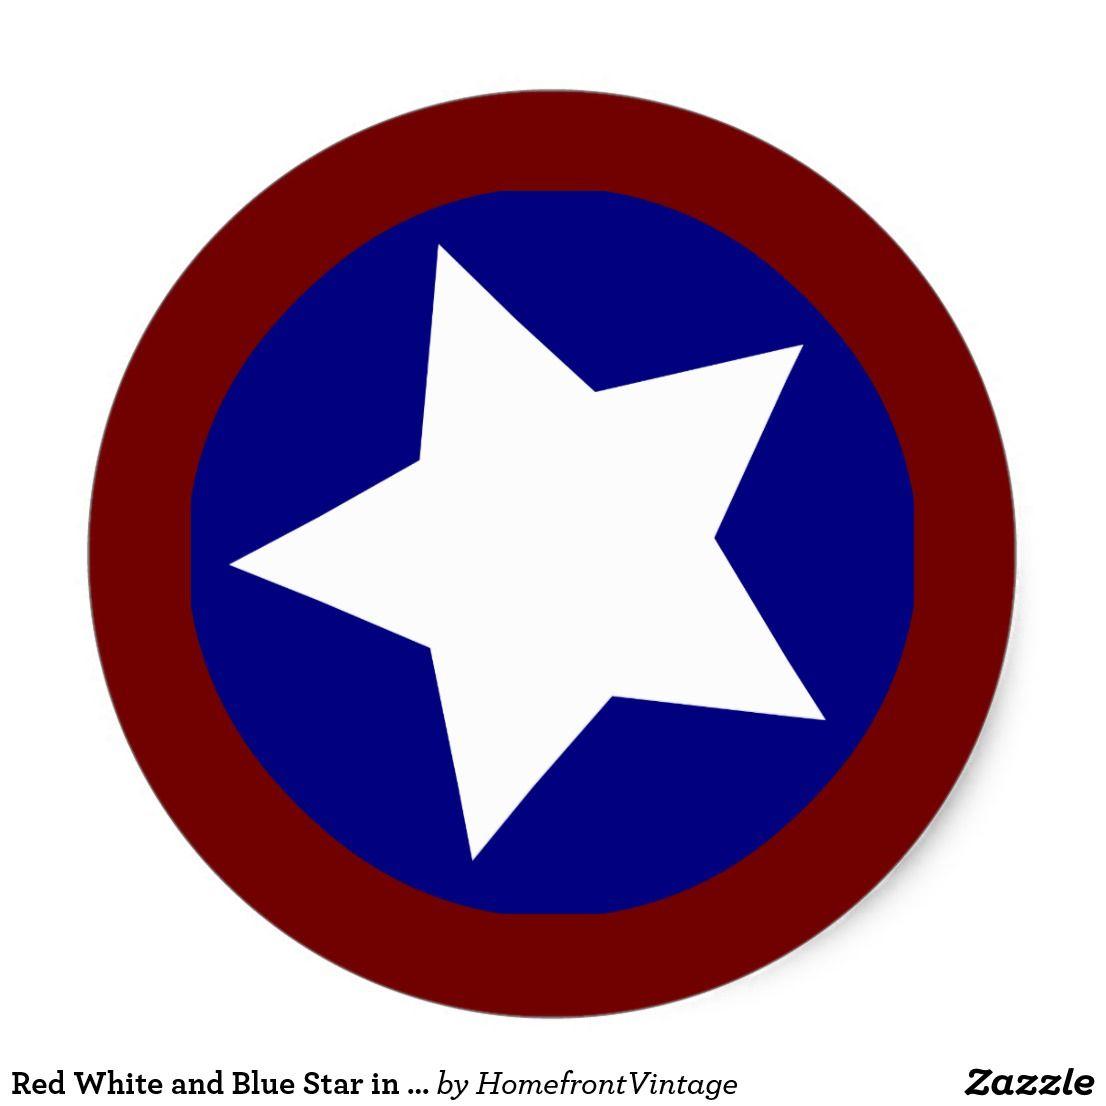 Cool Red White and Blue Star Logo - Red White and Blue Star in Circle Classic Round Sticker | Print on ...